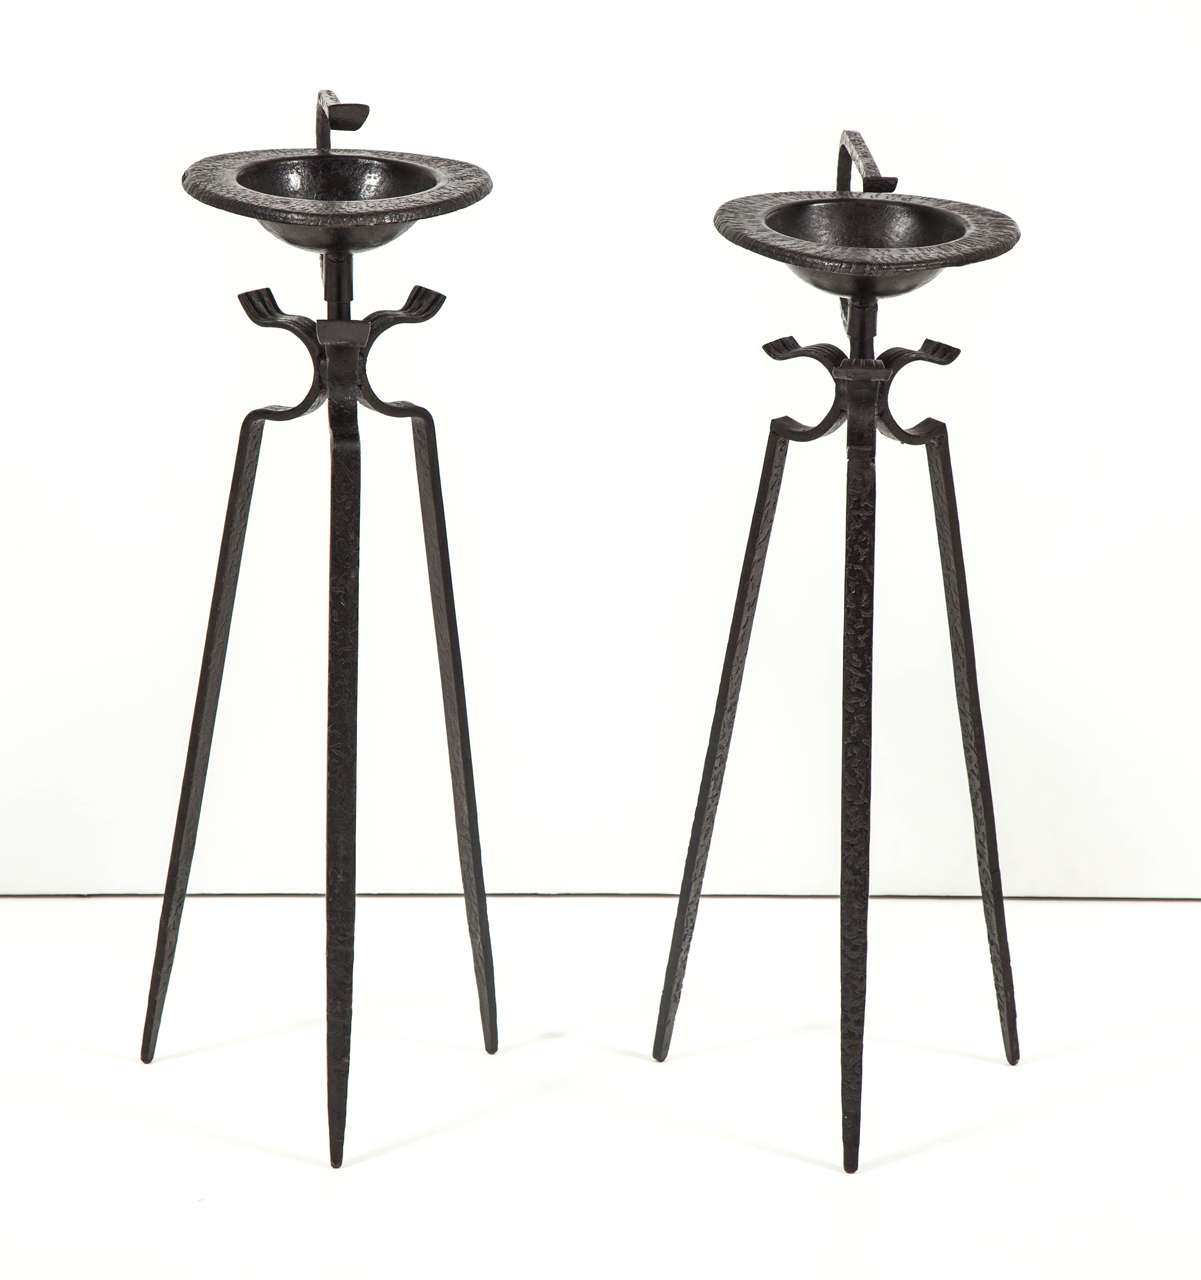 Tripod smoking stands with curling top handles in black hammer-finished iron supporting rounded triangular removable ashtrays, French, circa 1950. Completely handmade and finished, the pair shows some minor differences in design and dimensions.